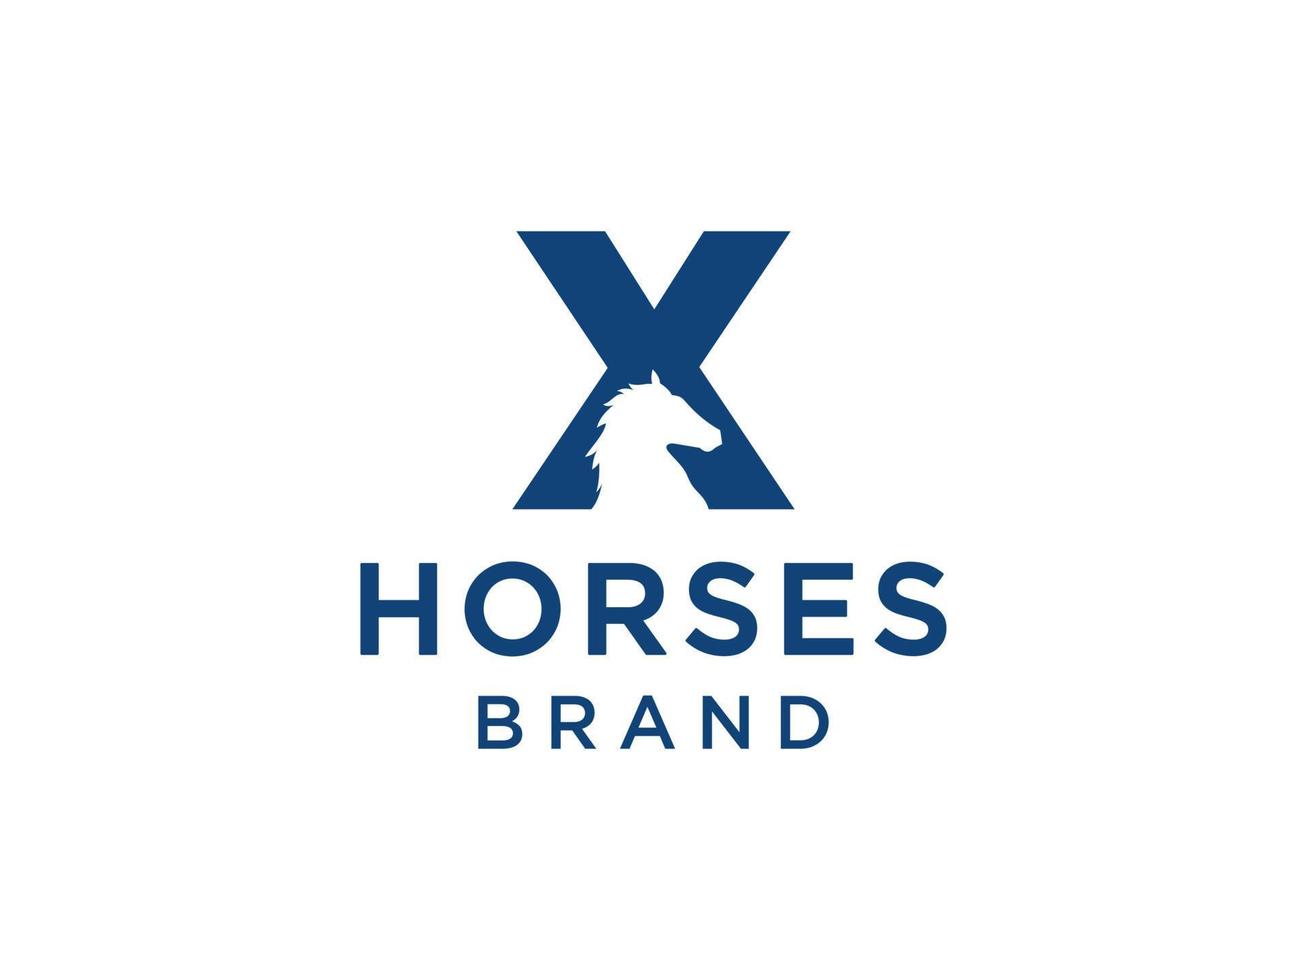 The logo design with the initial letter X is combined with a modern and professional horse head symbol vector